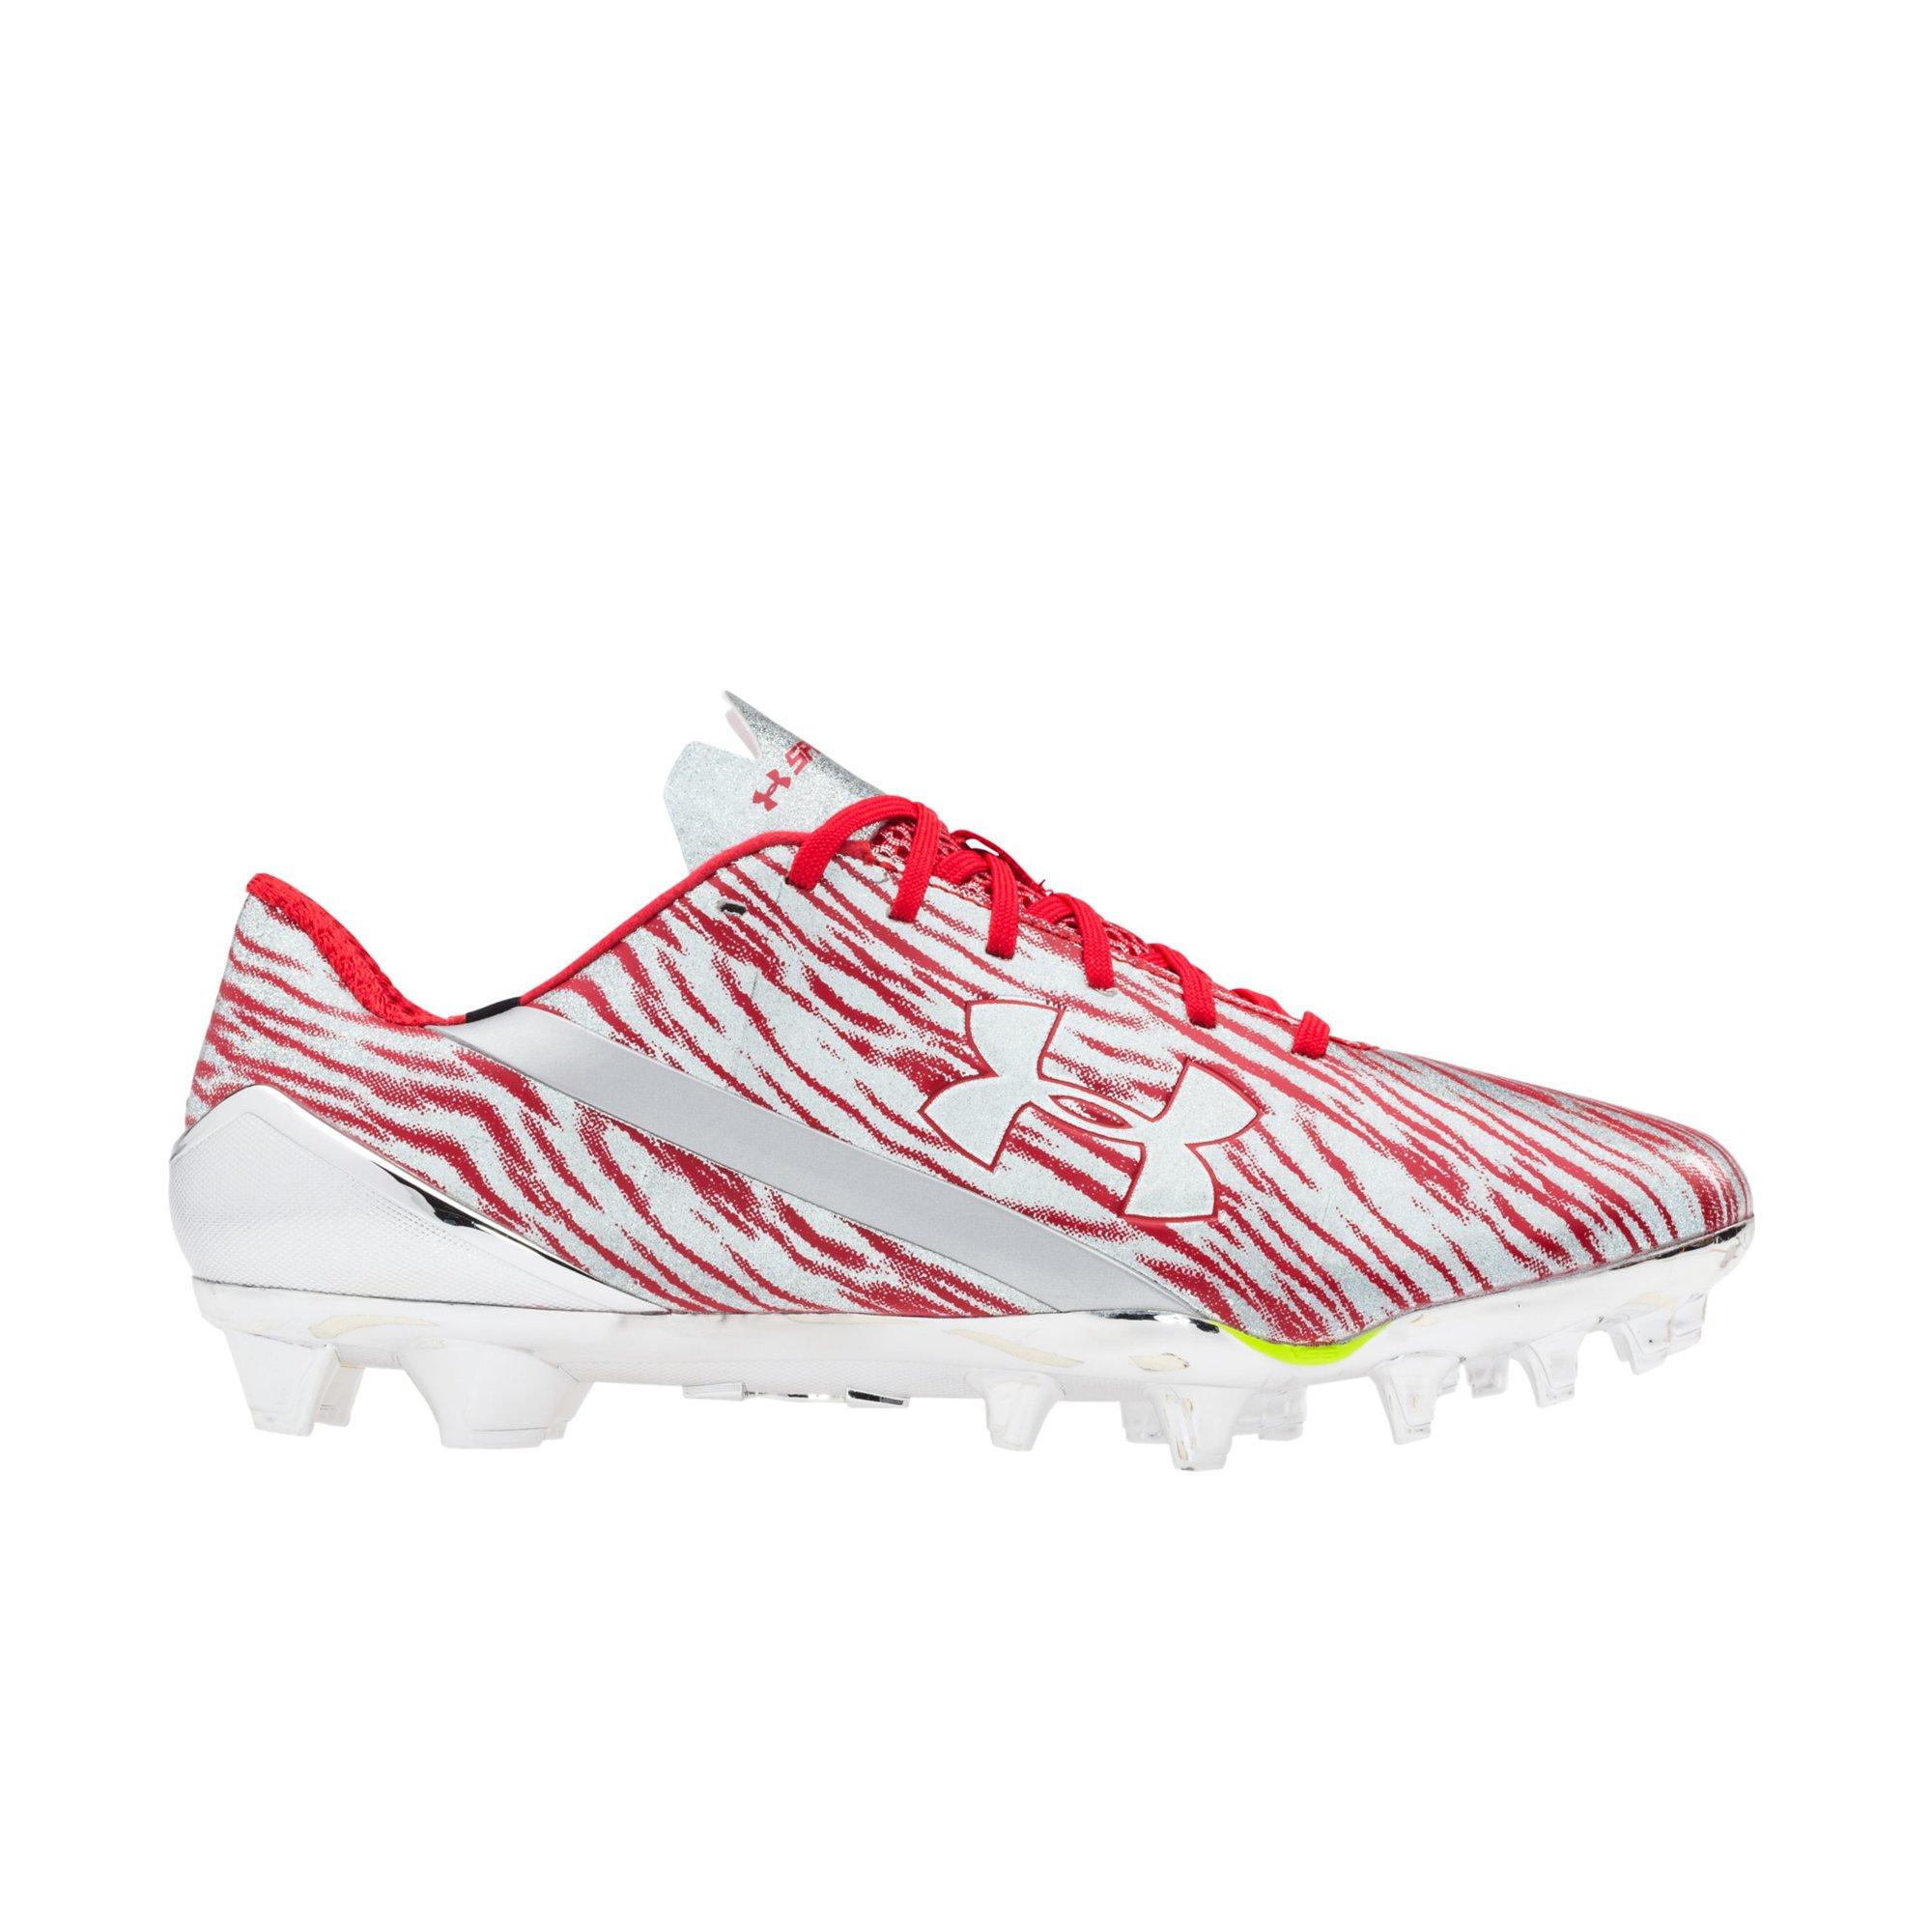 under armour football cleats red